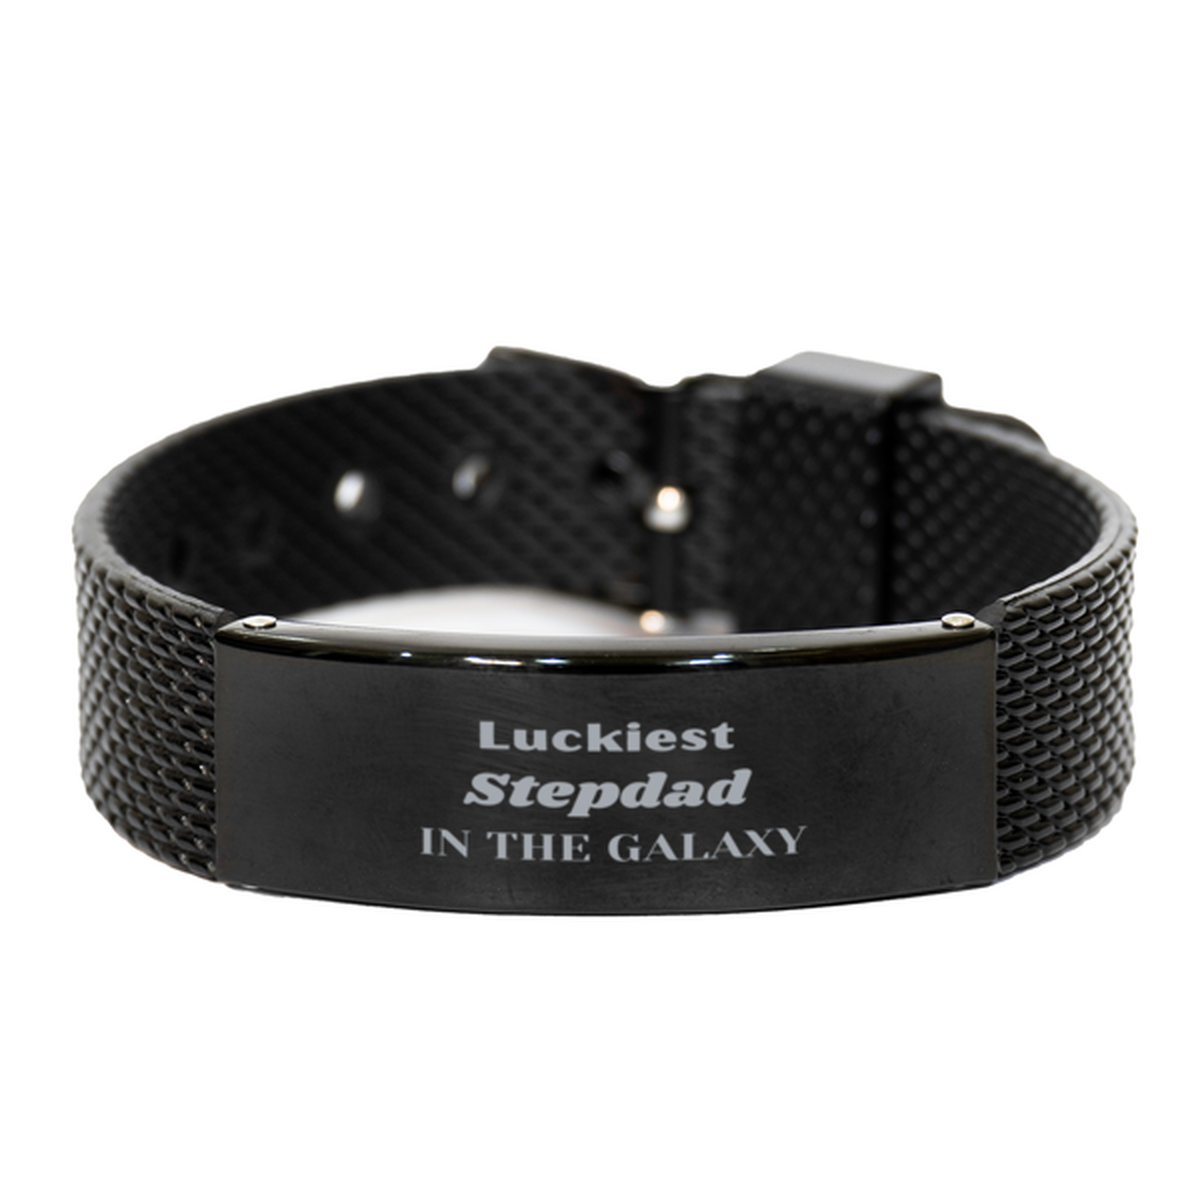 Luckiest Stepdad in the Galaxy, To My Stepdad Engraved Gifts, Christmas Stepdad Black Shark Mesh Bracelet Gifts, X-mas Birthday Unique Gifts For Stepdad Men Women